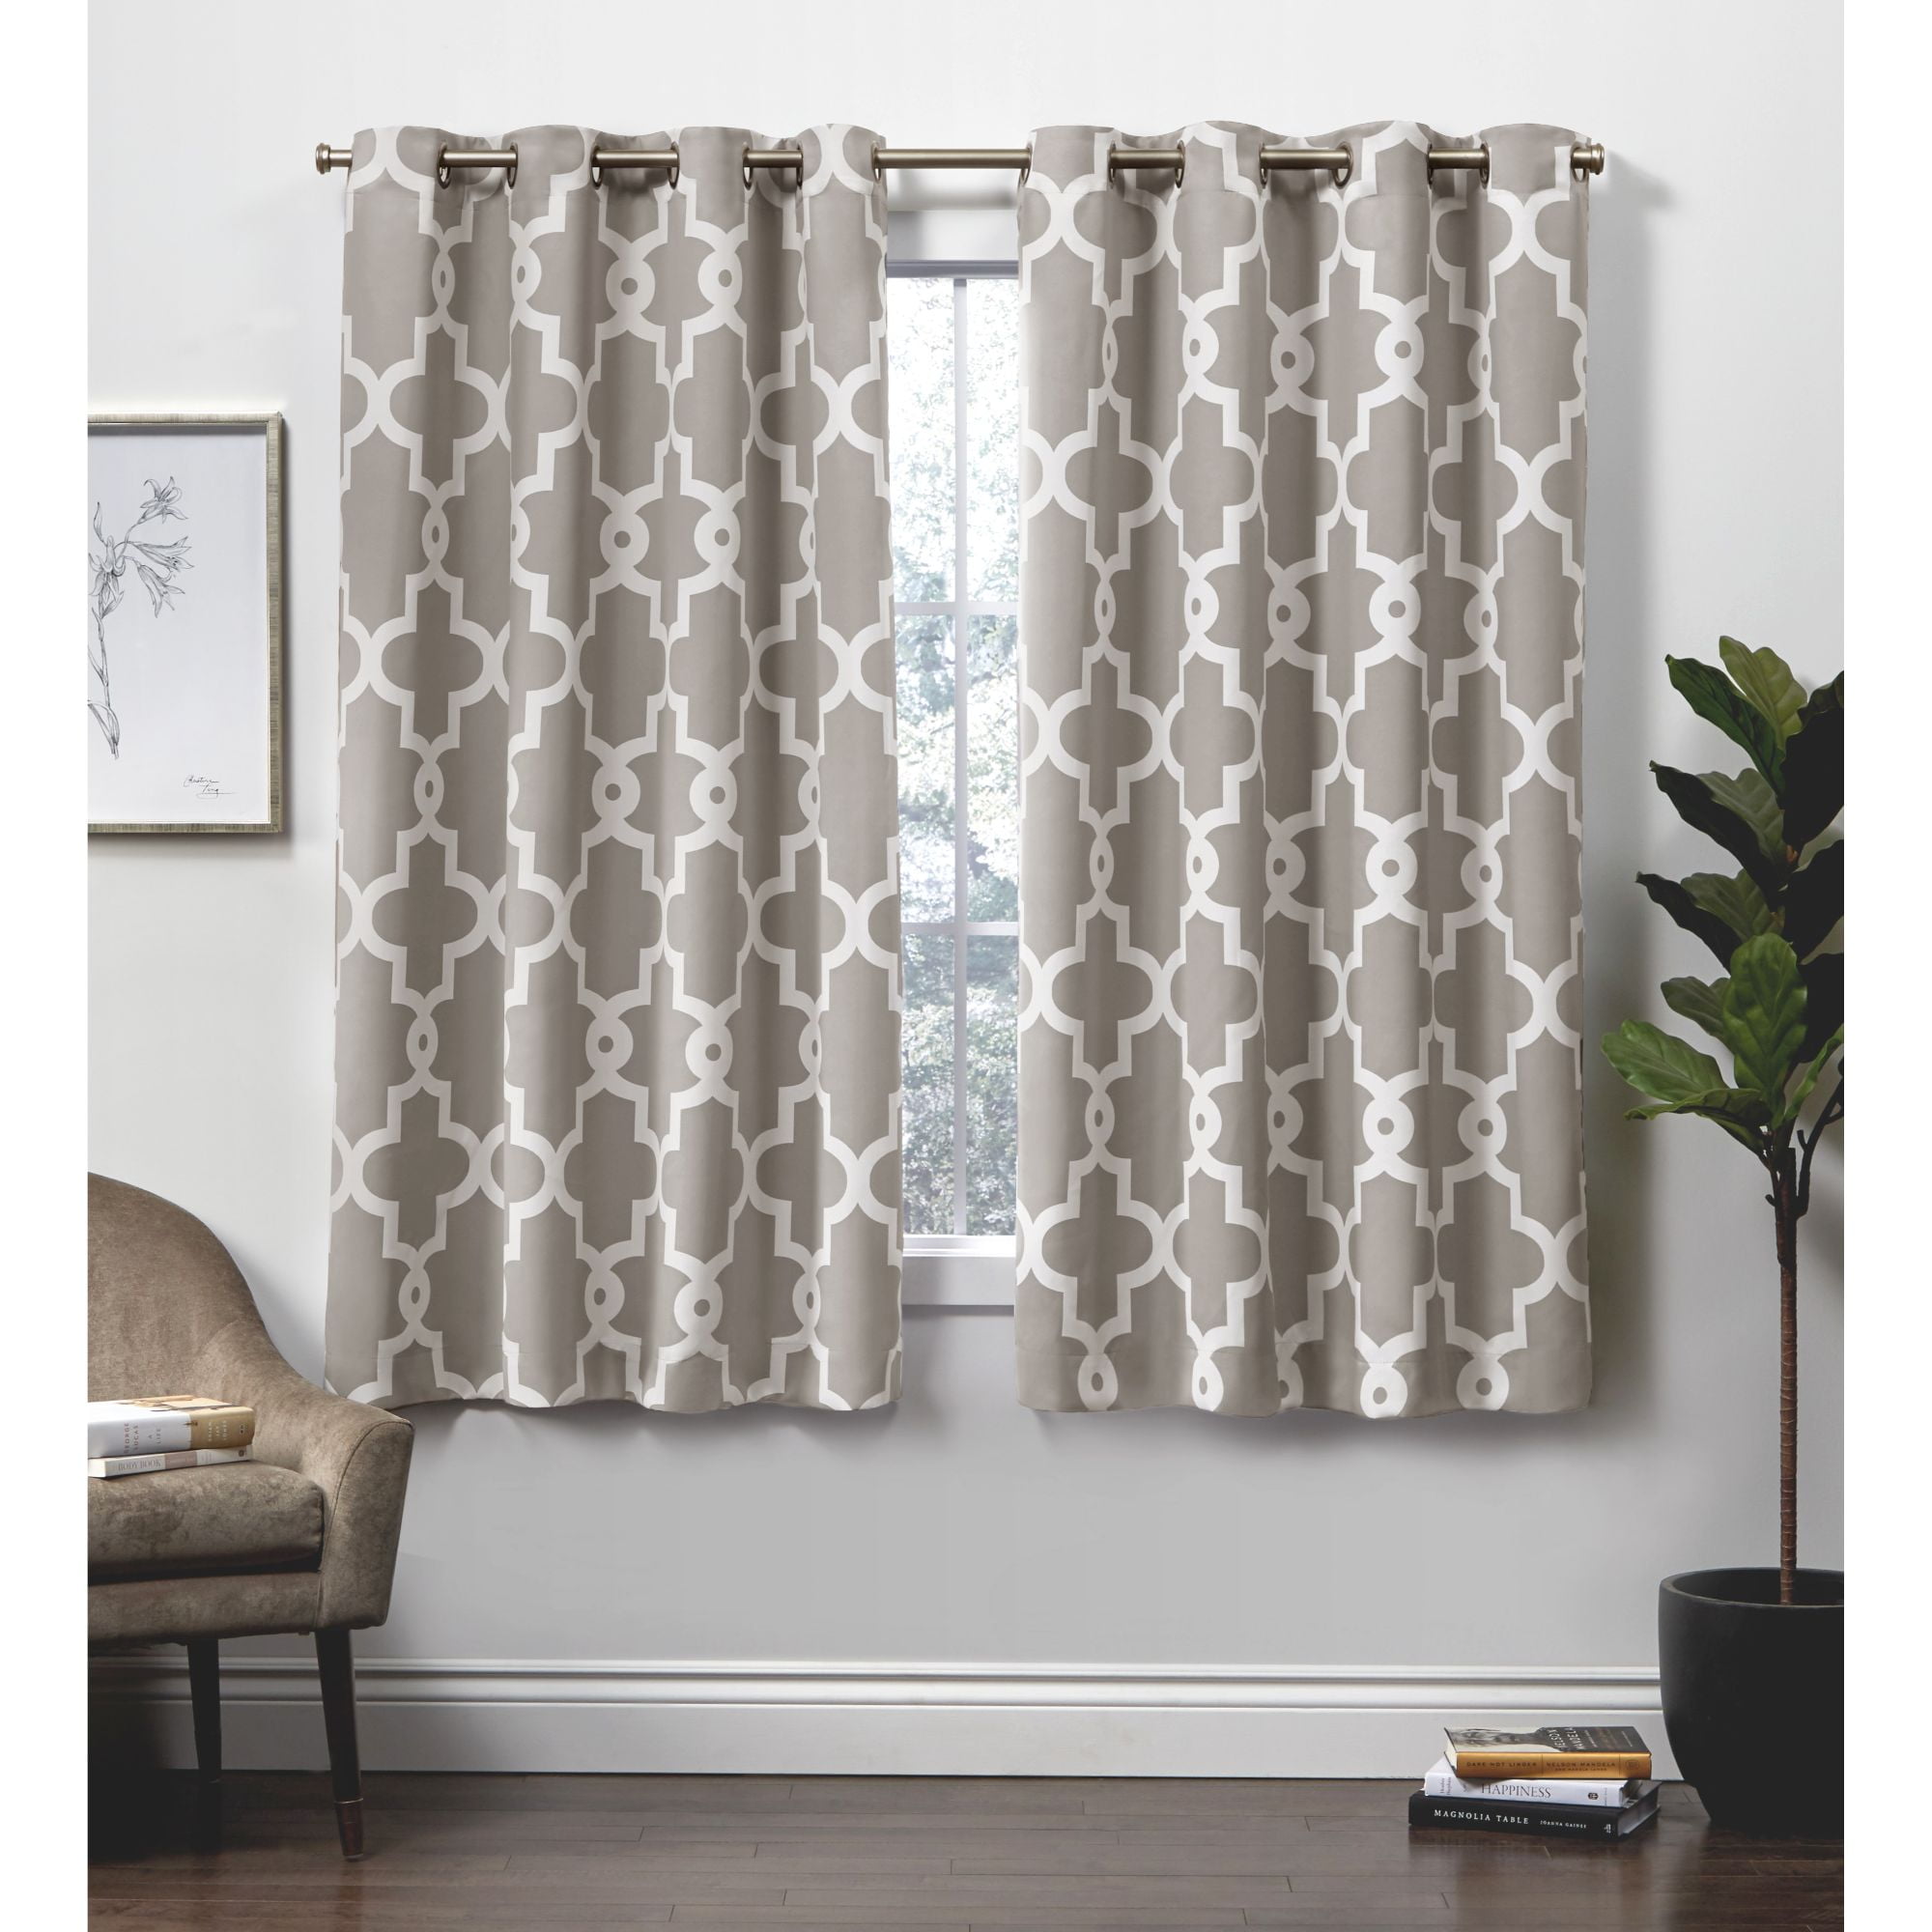 VCNY Kingdom Printed Blackout 40 x 84 Brown/Taupe